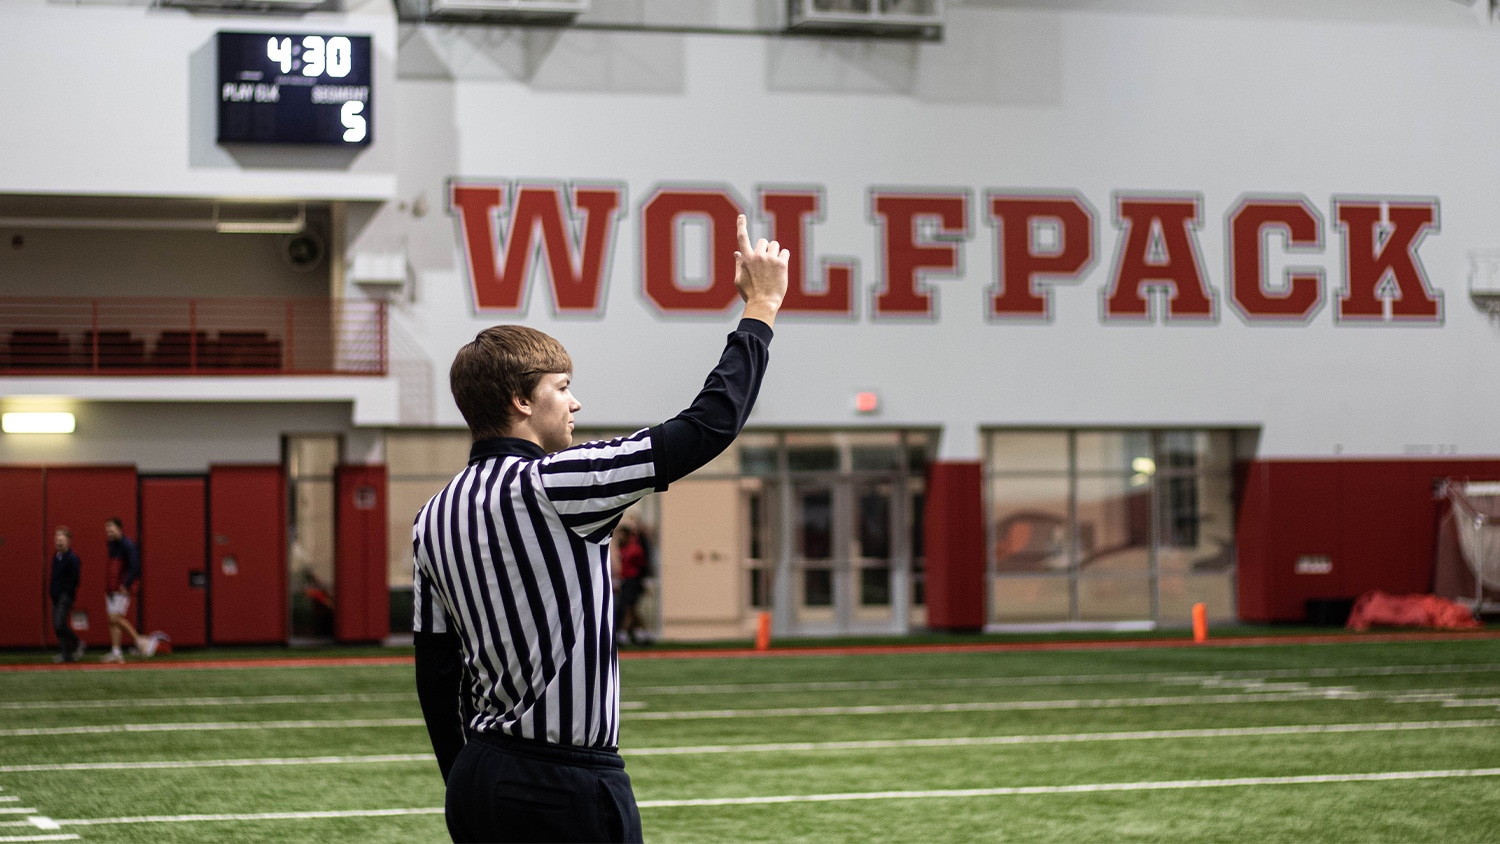 A student official makes a call during an intramural sport event